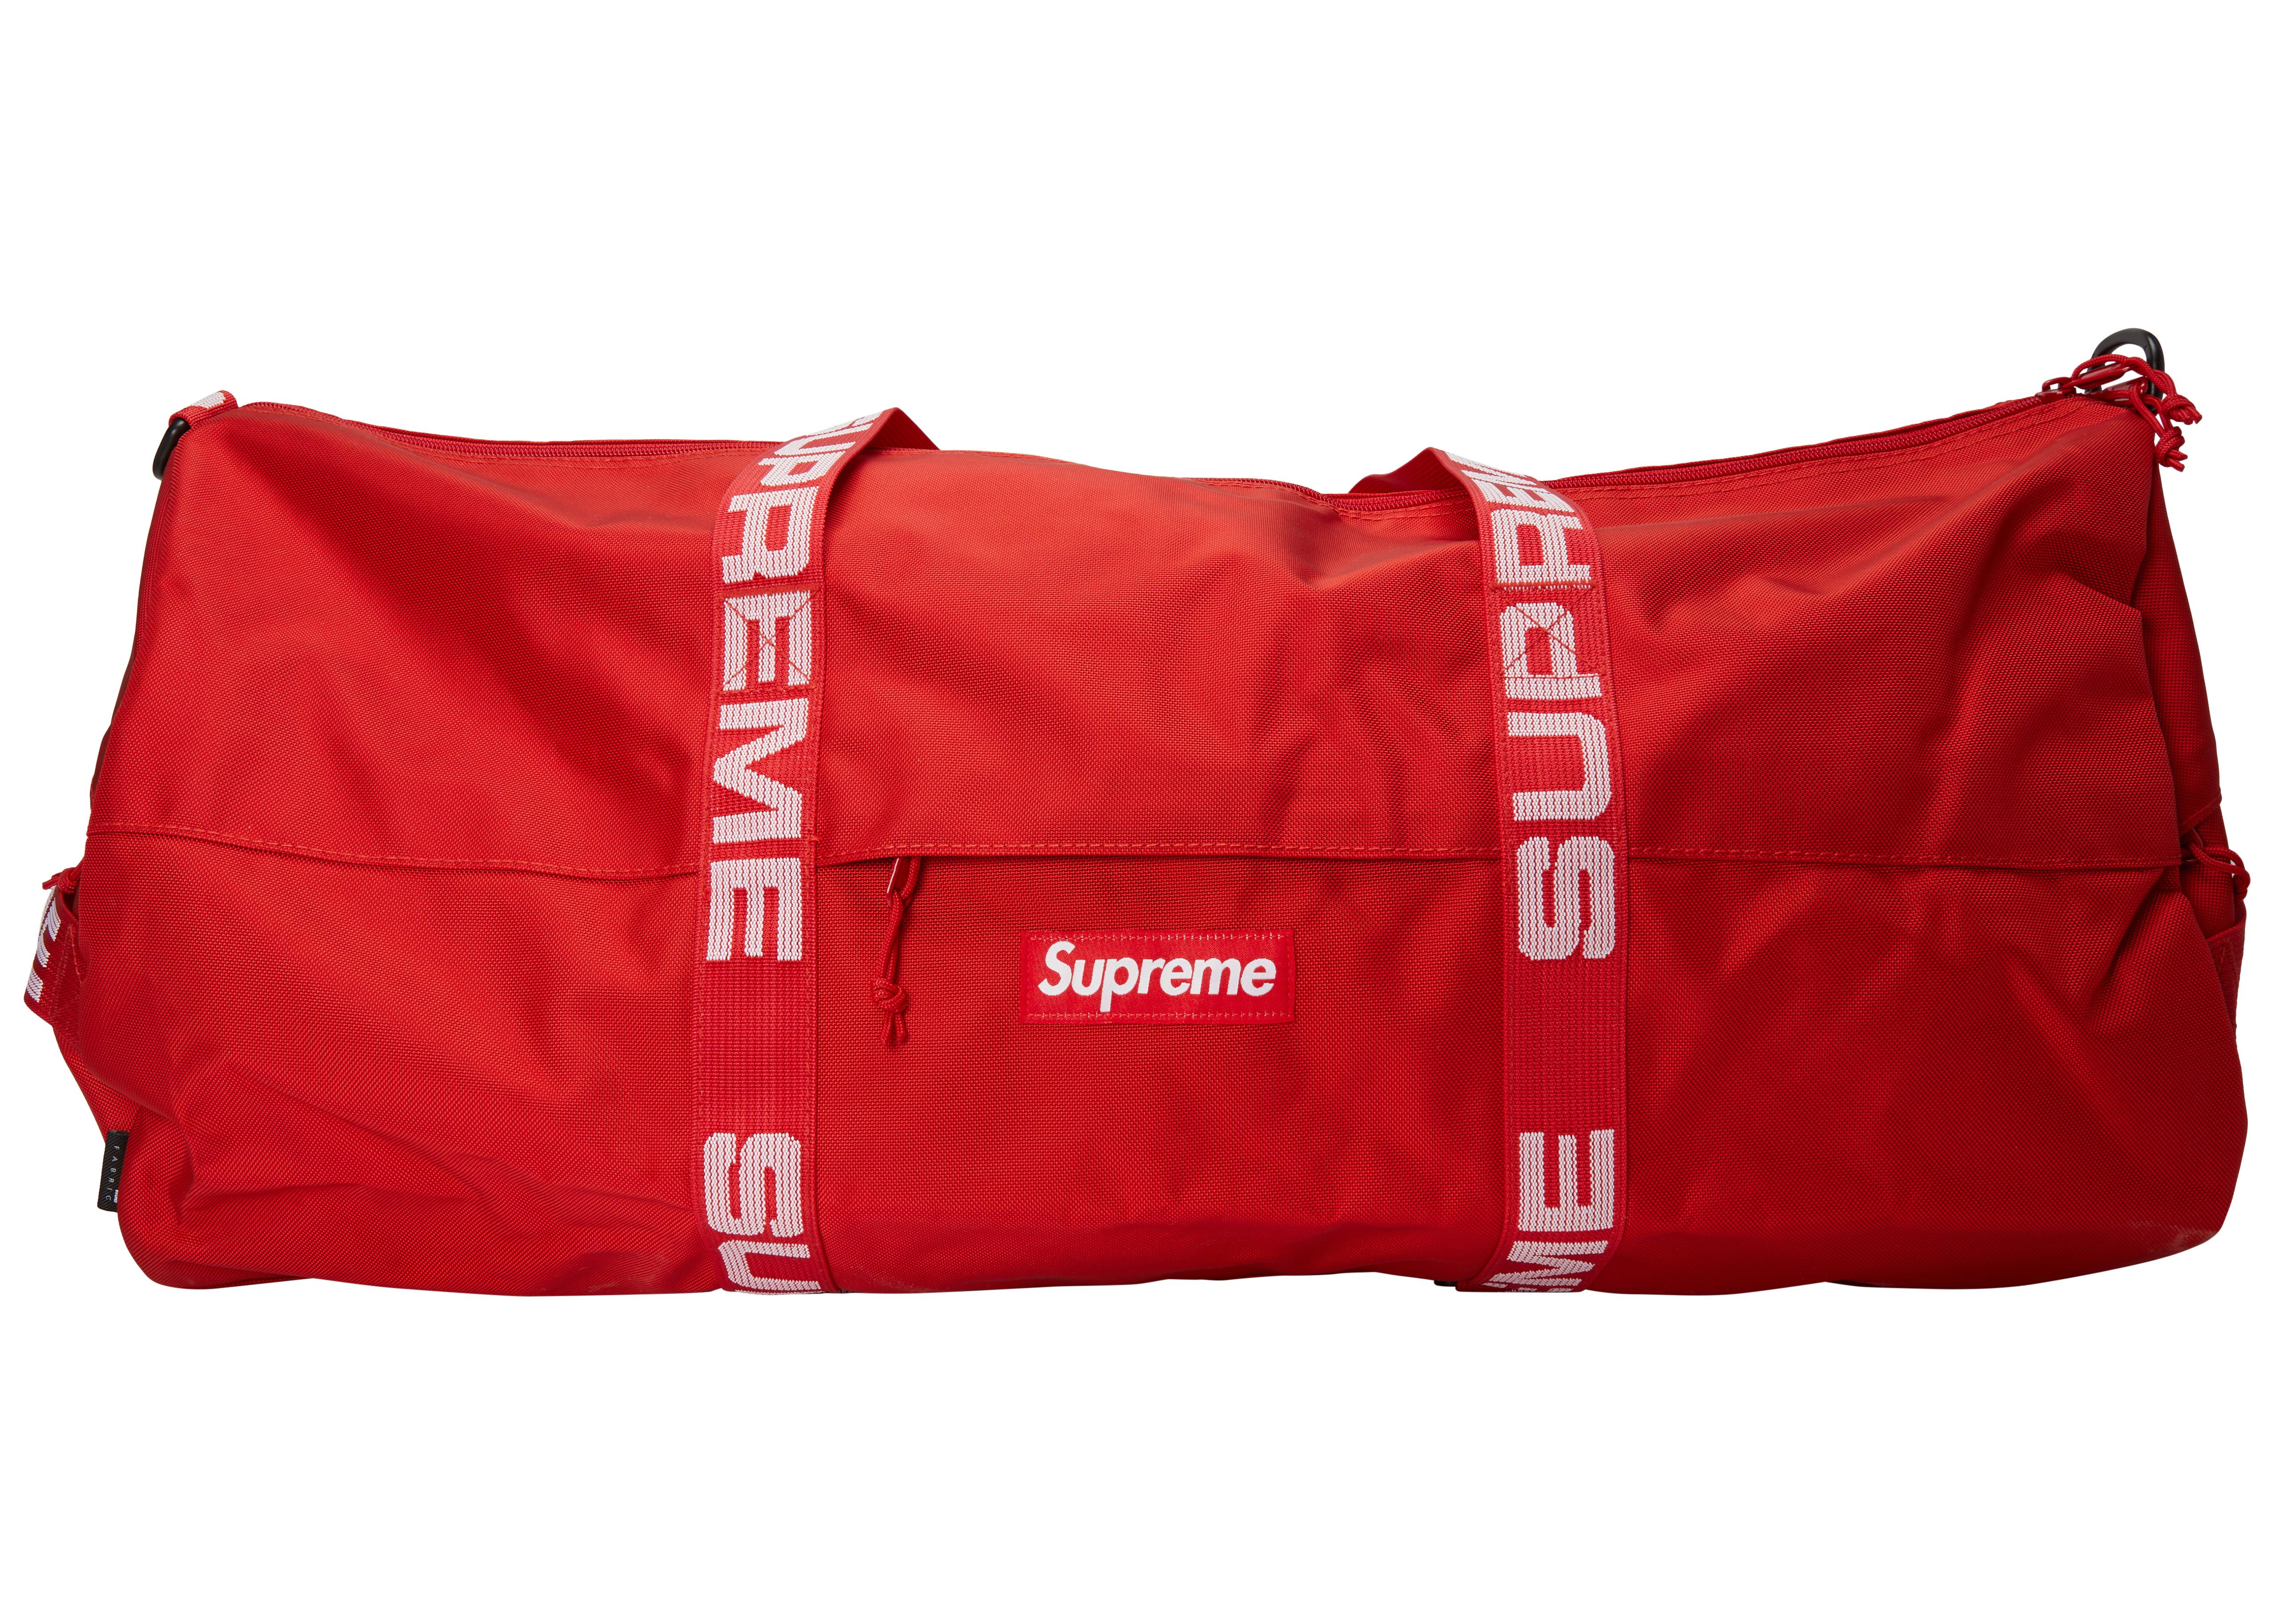 Supreme Large Duffle Bag (ss18) Red in Red for Men - Save 55% - Lyst